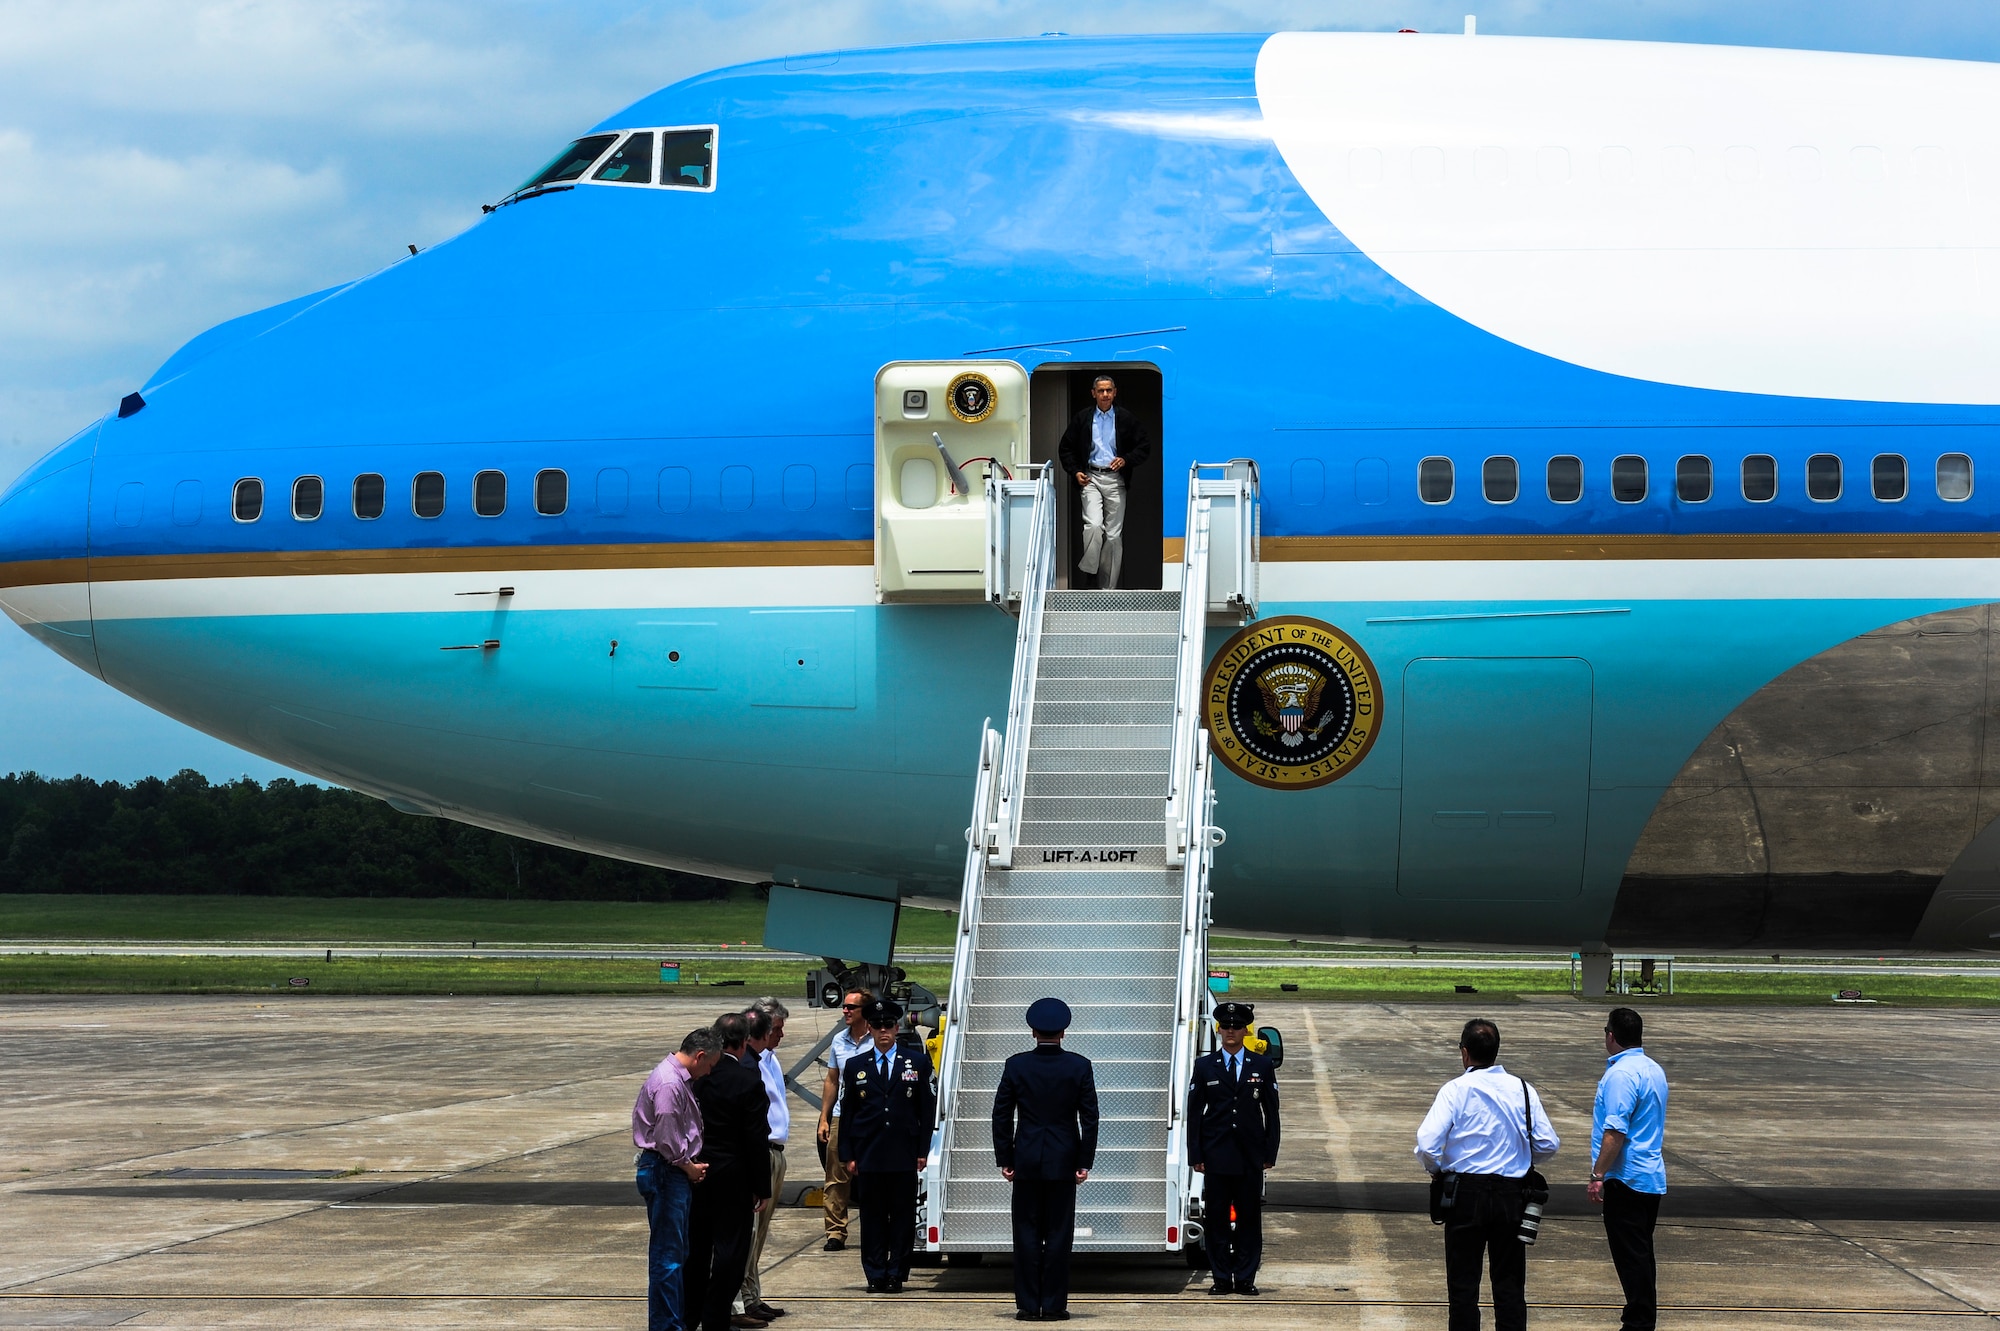 President Barack Obama steps off of Air Force One May 7, 2014, at Little Rock Air Force Base, Ark. President Obama visited with victims, local officials and emergency responders in Vilonia who were affected by the tornado on April 27. (U.S. Air Force photo/Senior Airman Kaylee Clark)